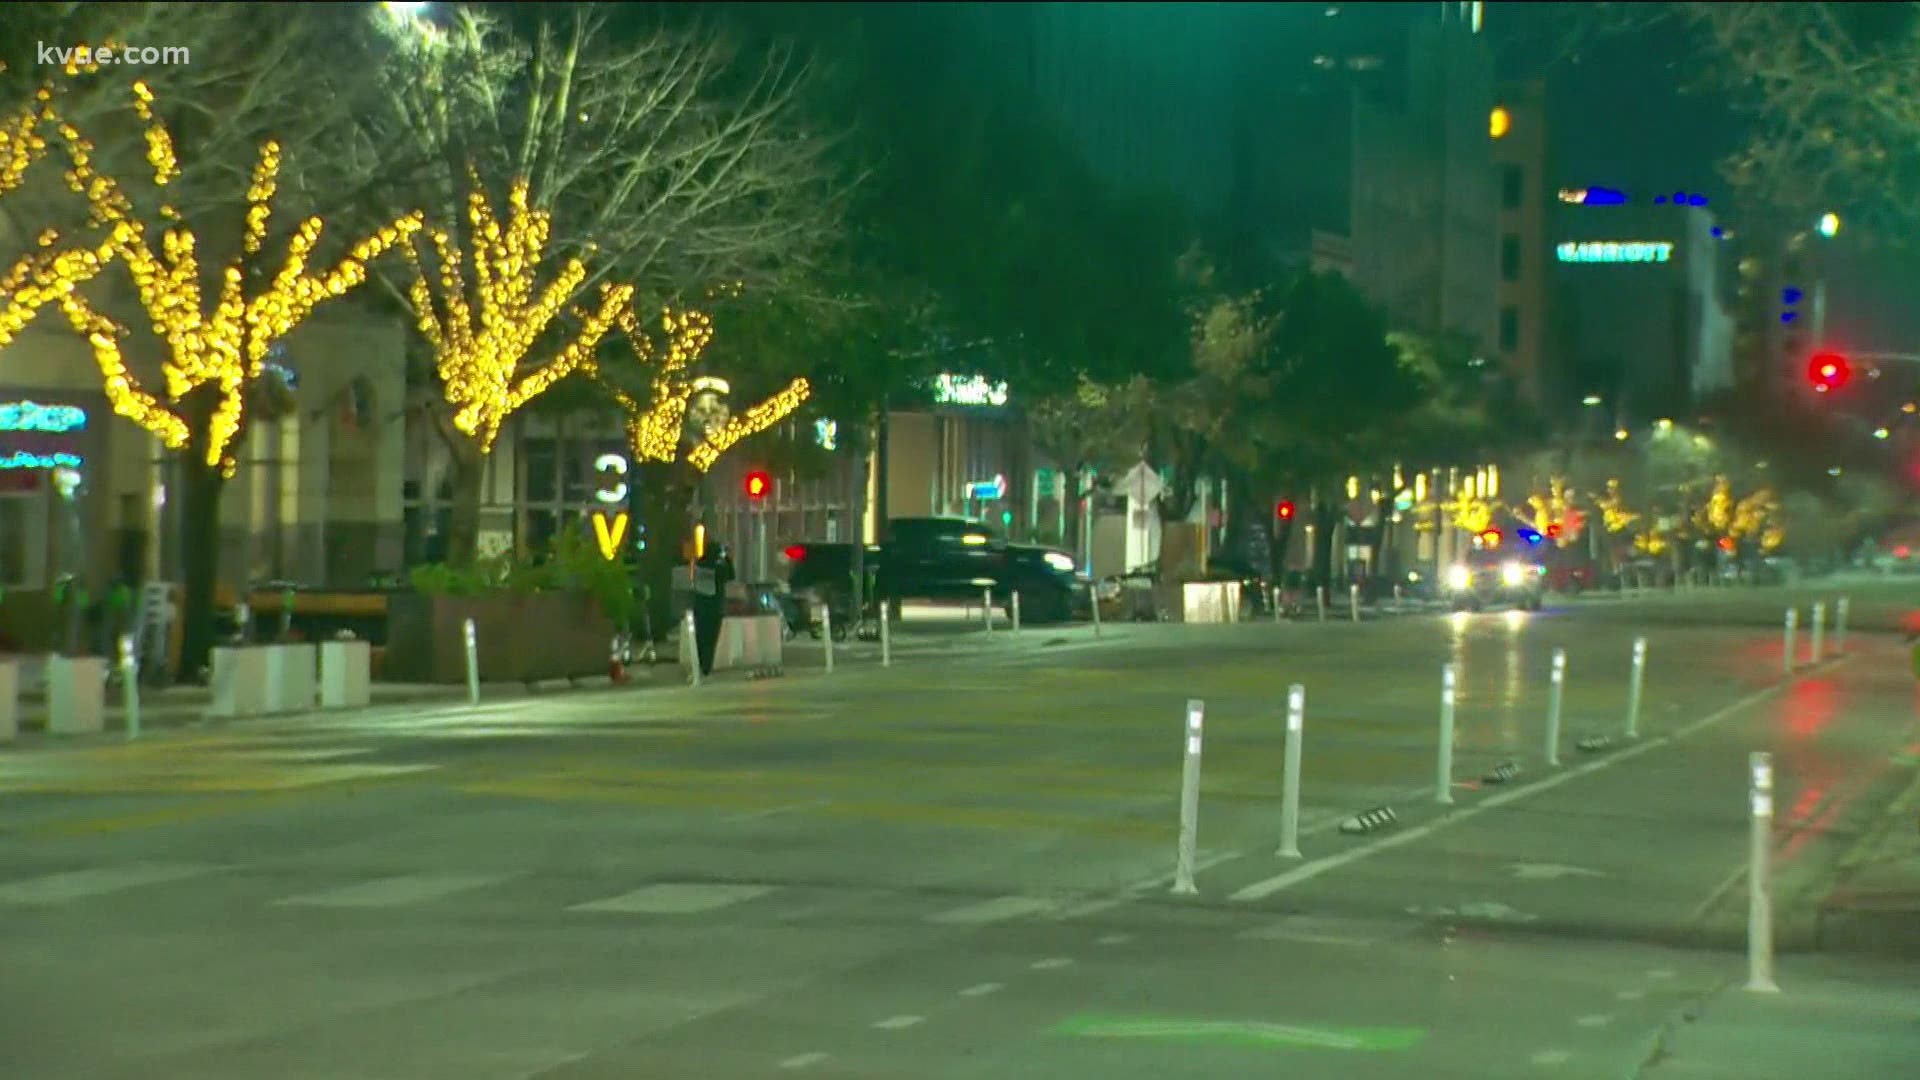 A resolution passed by Austin City Council will liven up the downtown area with live music allowed on weekends and new banners on Congress Ave.